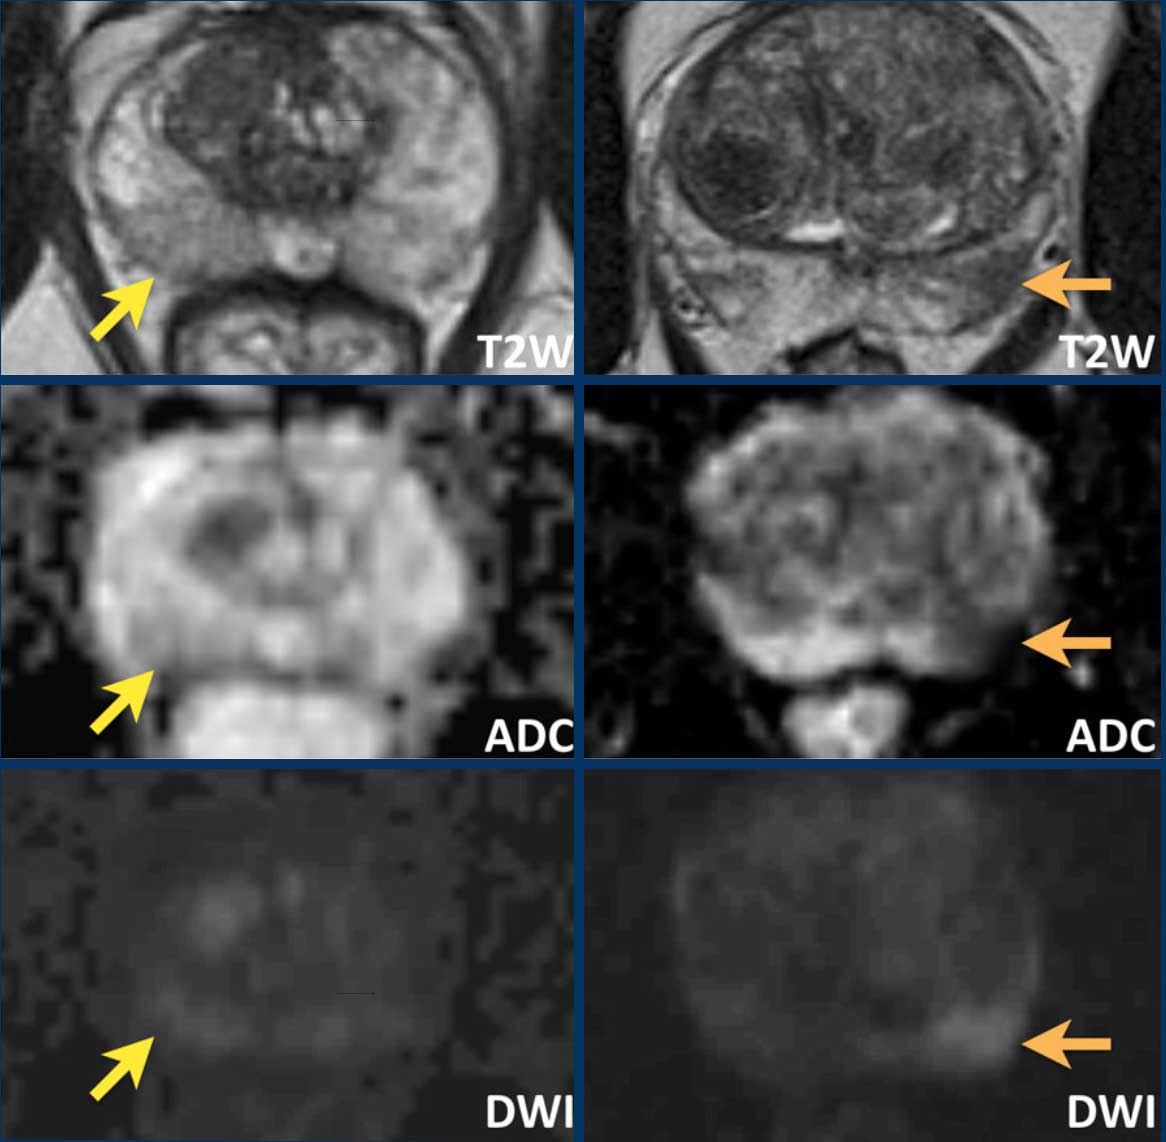 Differences between prostatitis ( images on the left) and  prostate cancer (images on the right)